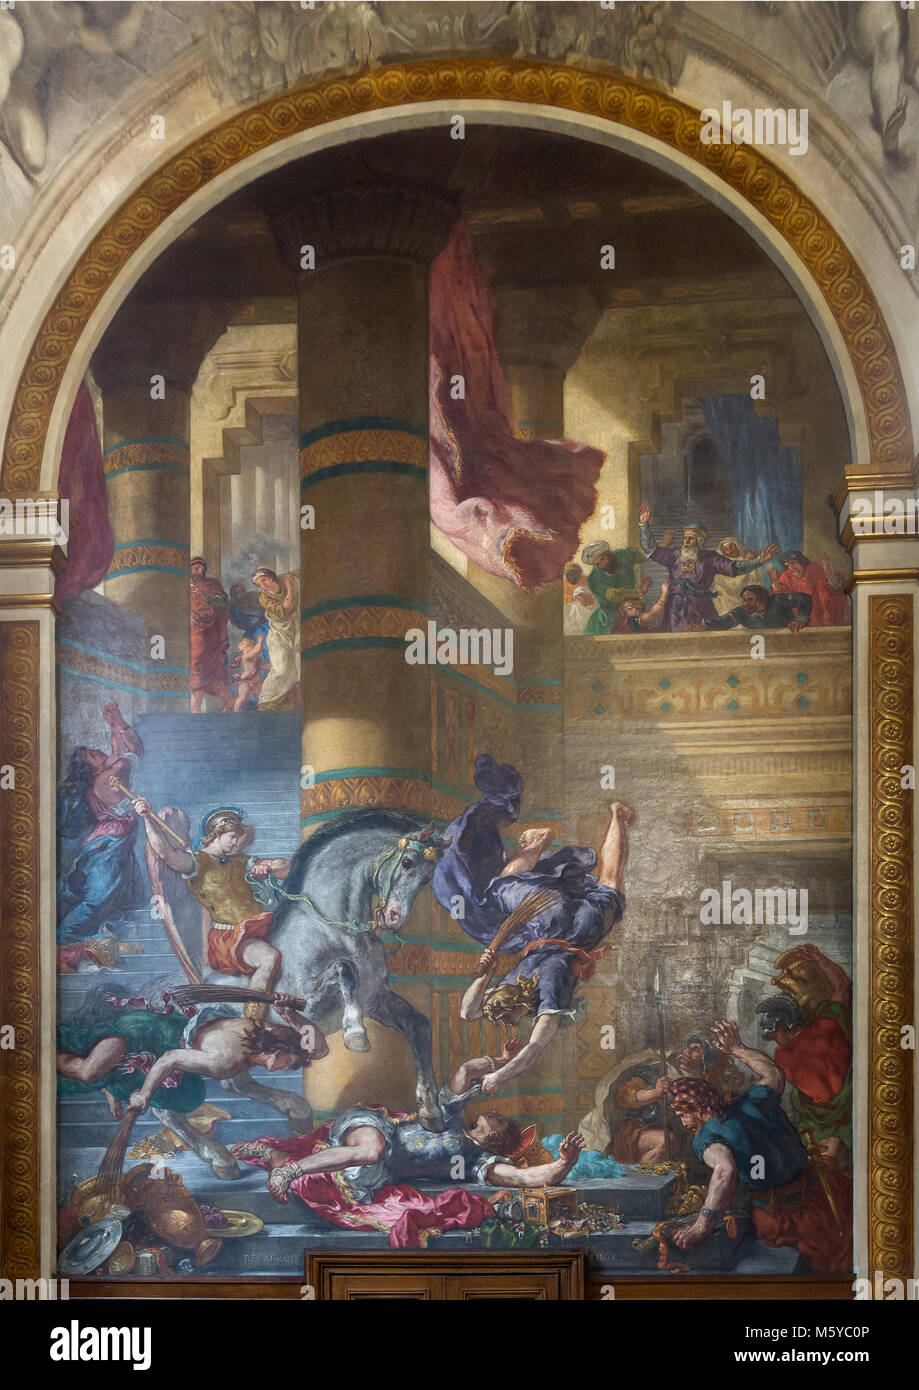 Eugène Delacroix's mural of Heliodorus Driven from the Temple in the Chapel of Guardian Angels in the Church of Saint-Sulpice in Paris, France Stock Photo